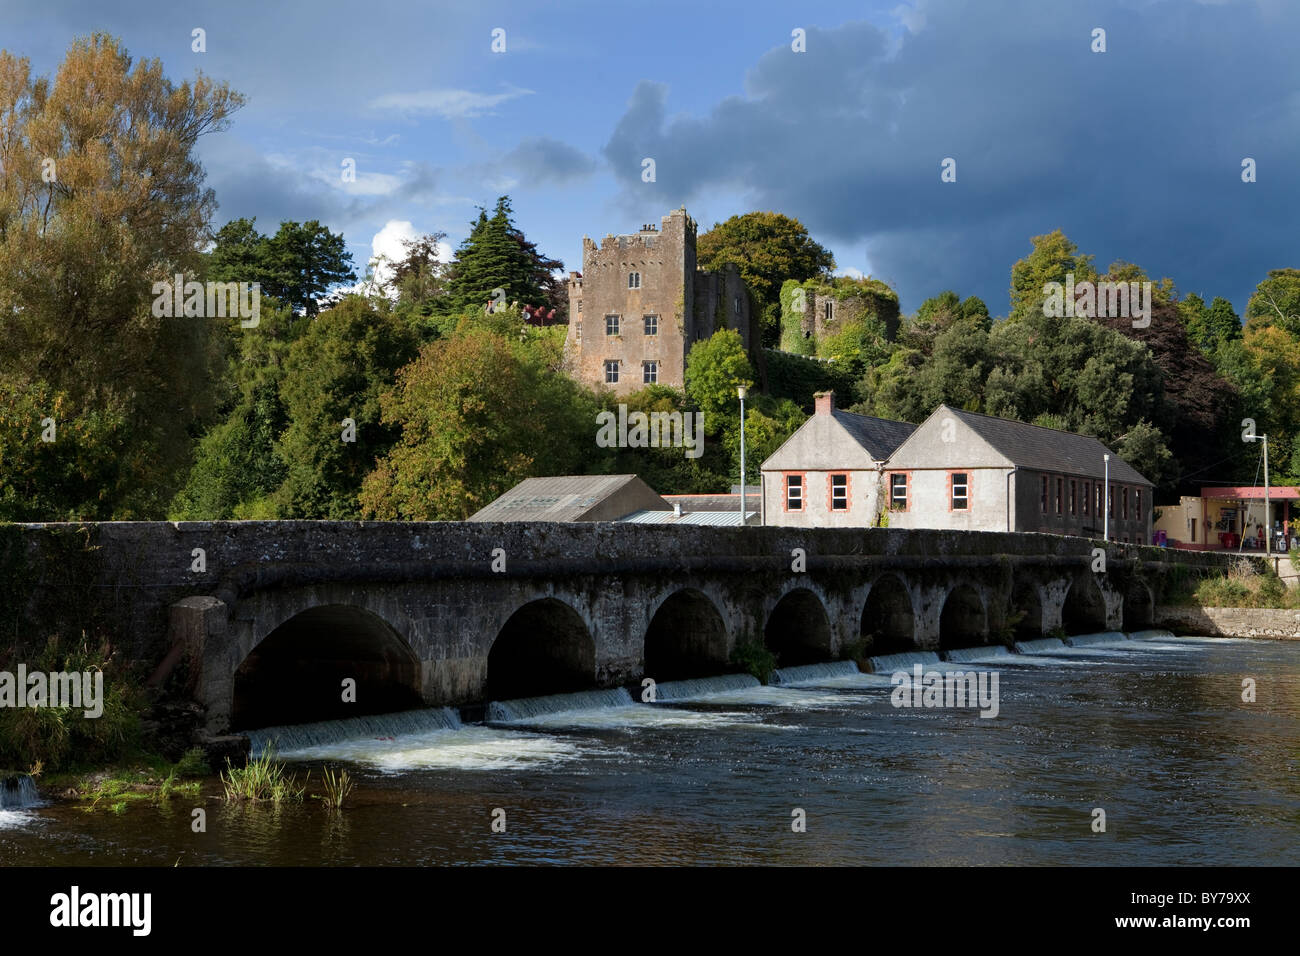 Castle built by King John in 1186 to guard the river crossing and 15 arch bridge over the River Suir, Ardfinnan, County Tipperary, Ireland Stock Photo